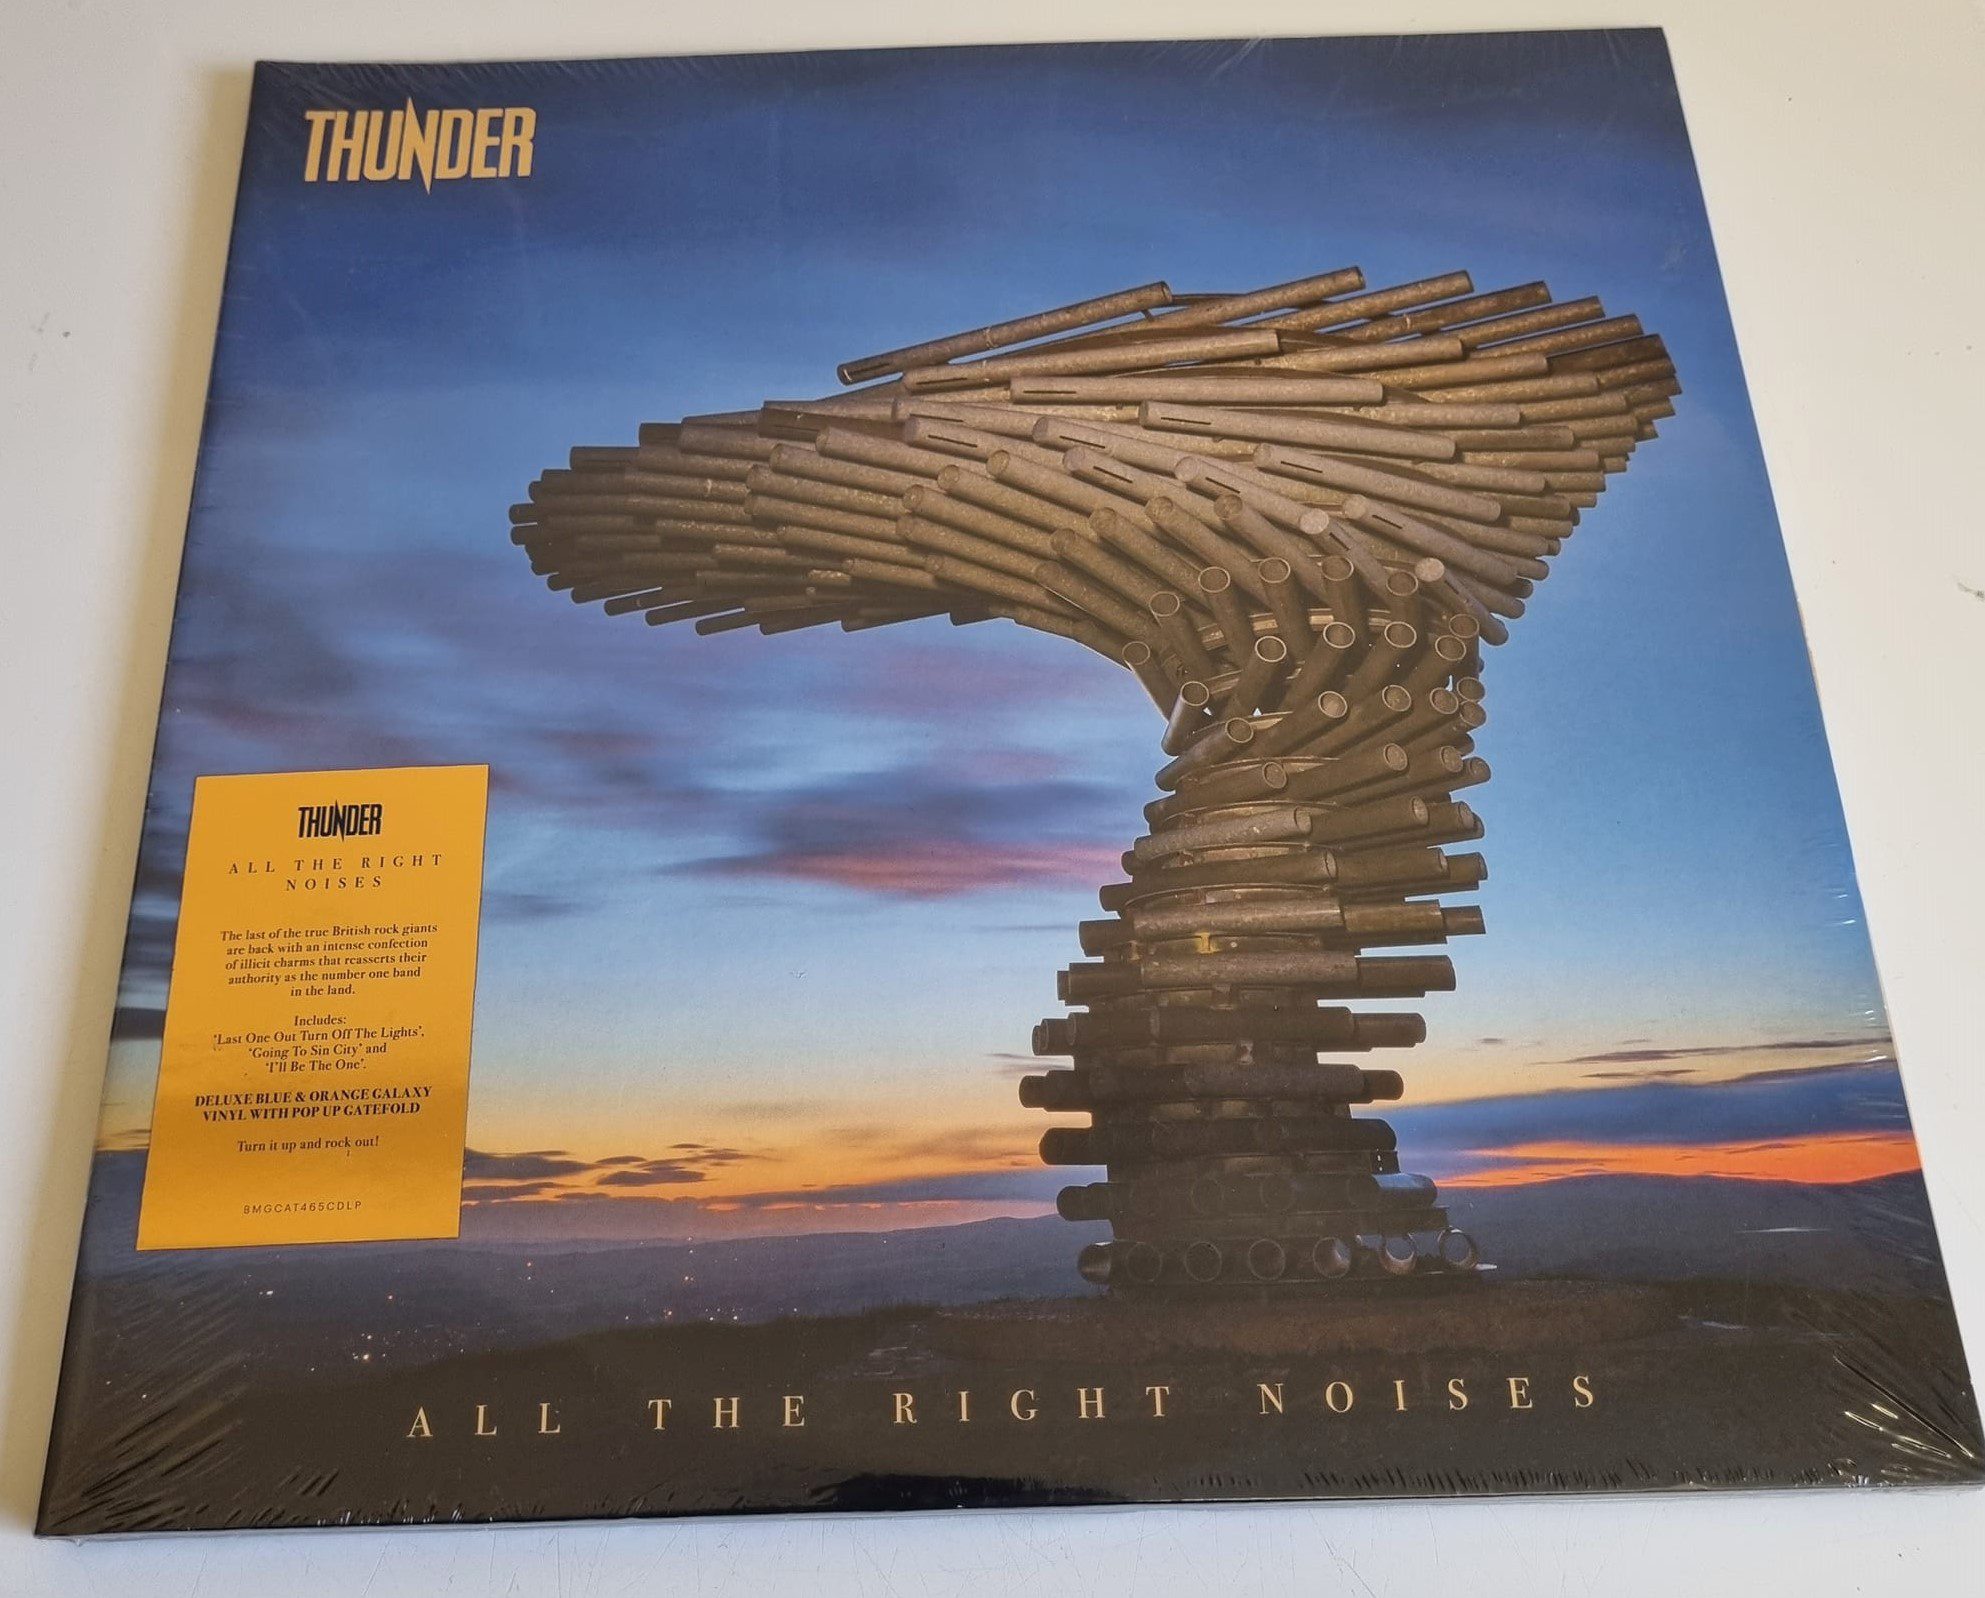 Buy this rare Thunder record by clicking here